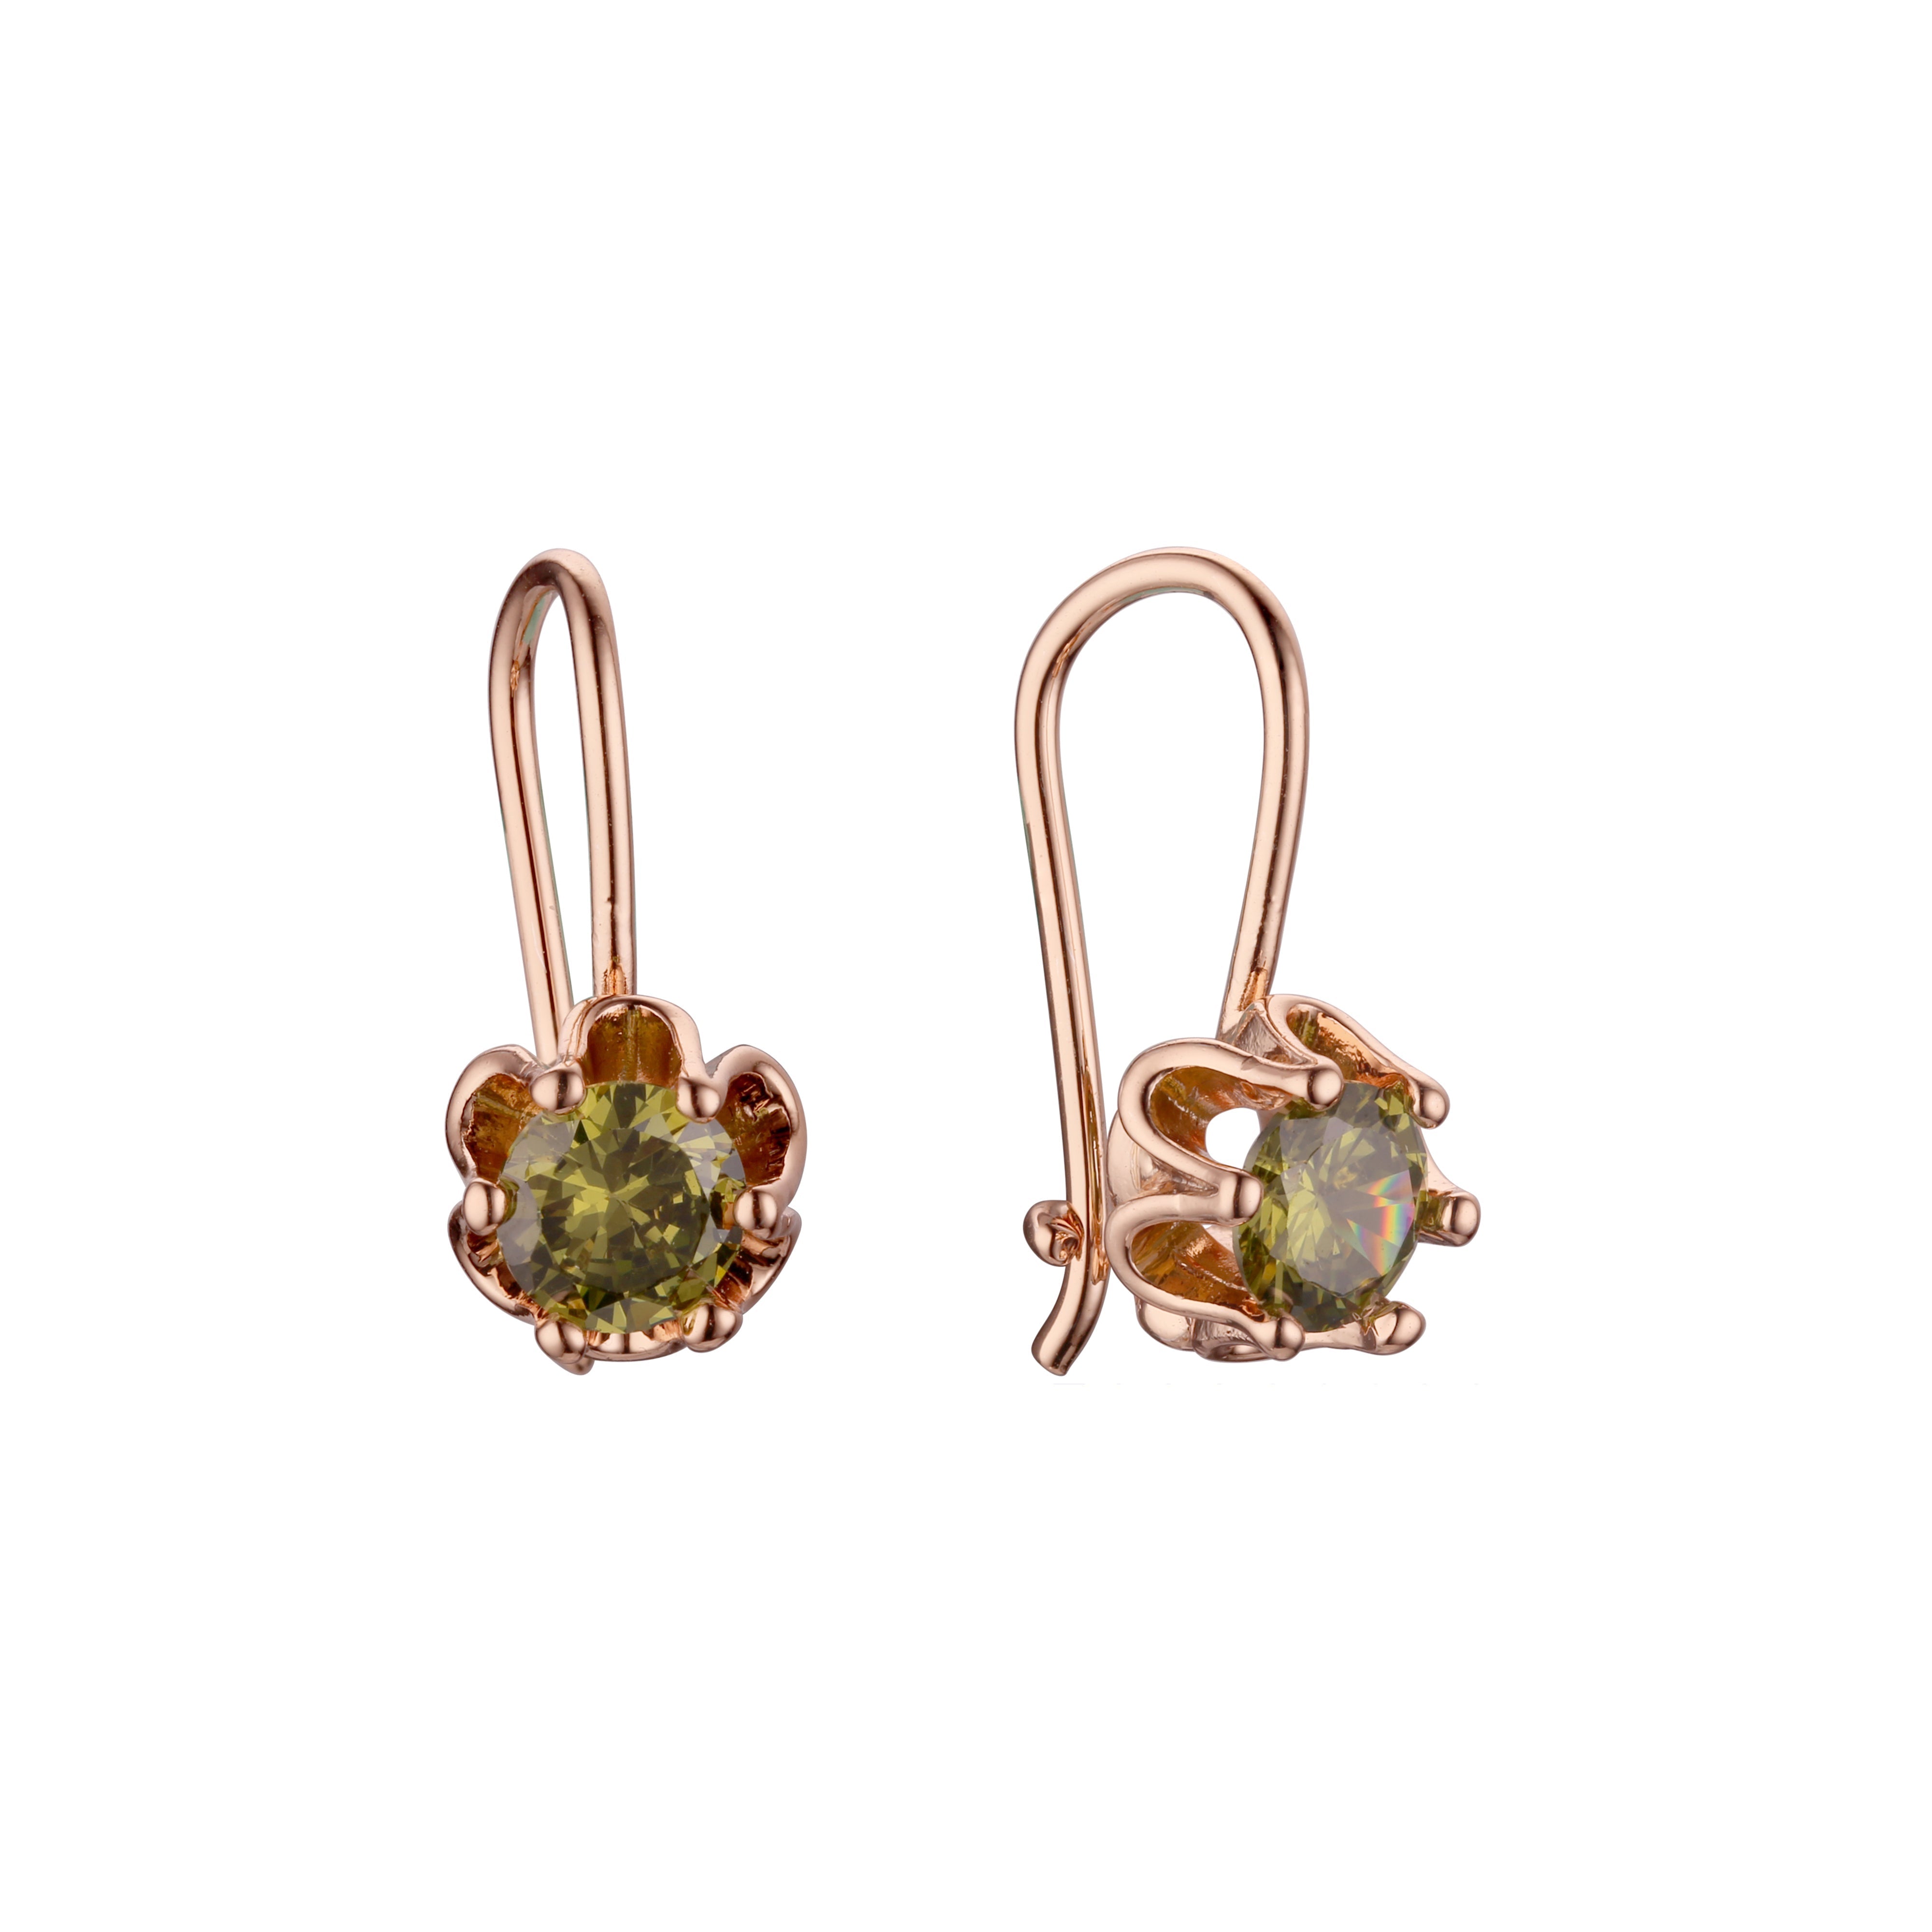 .Solitaire wire hook colorful cz earrings plated in 14K Gold, Rose Gold